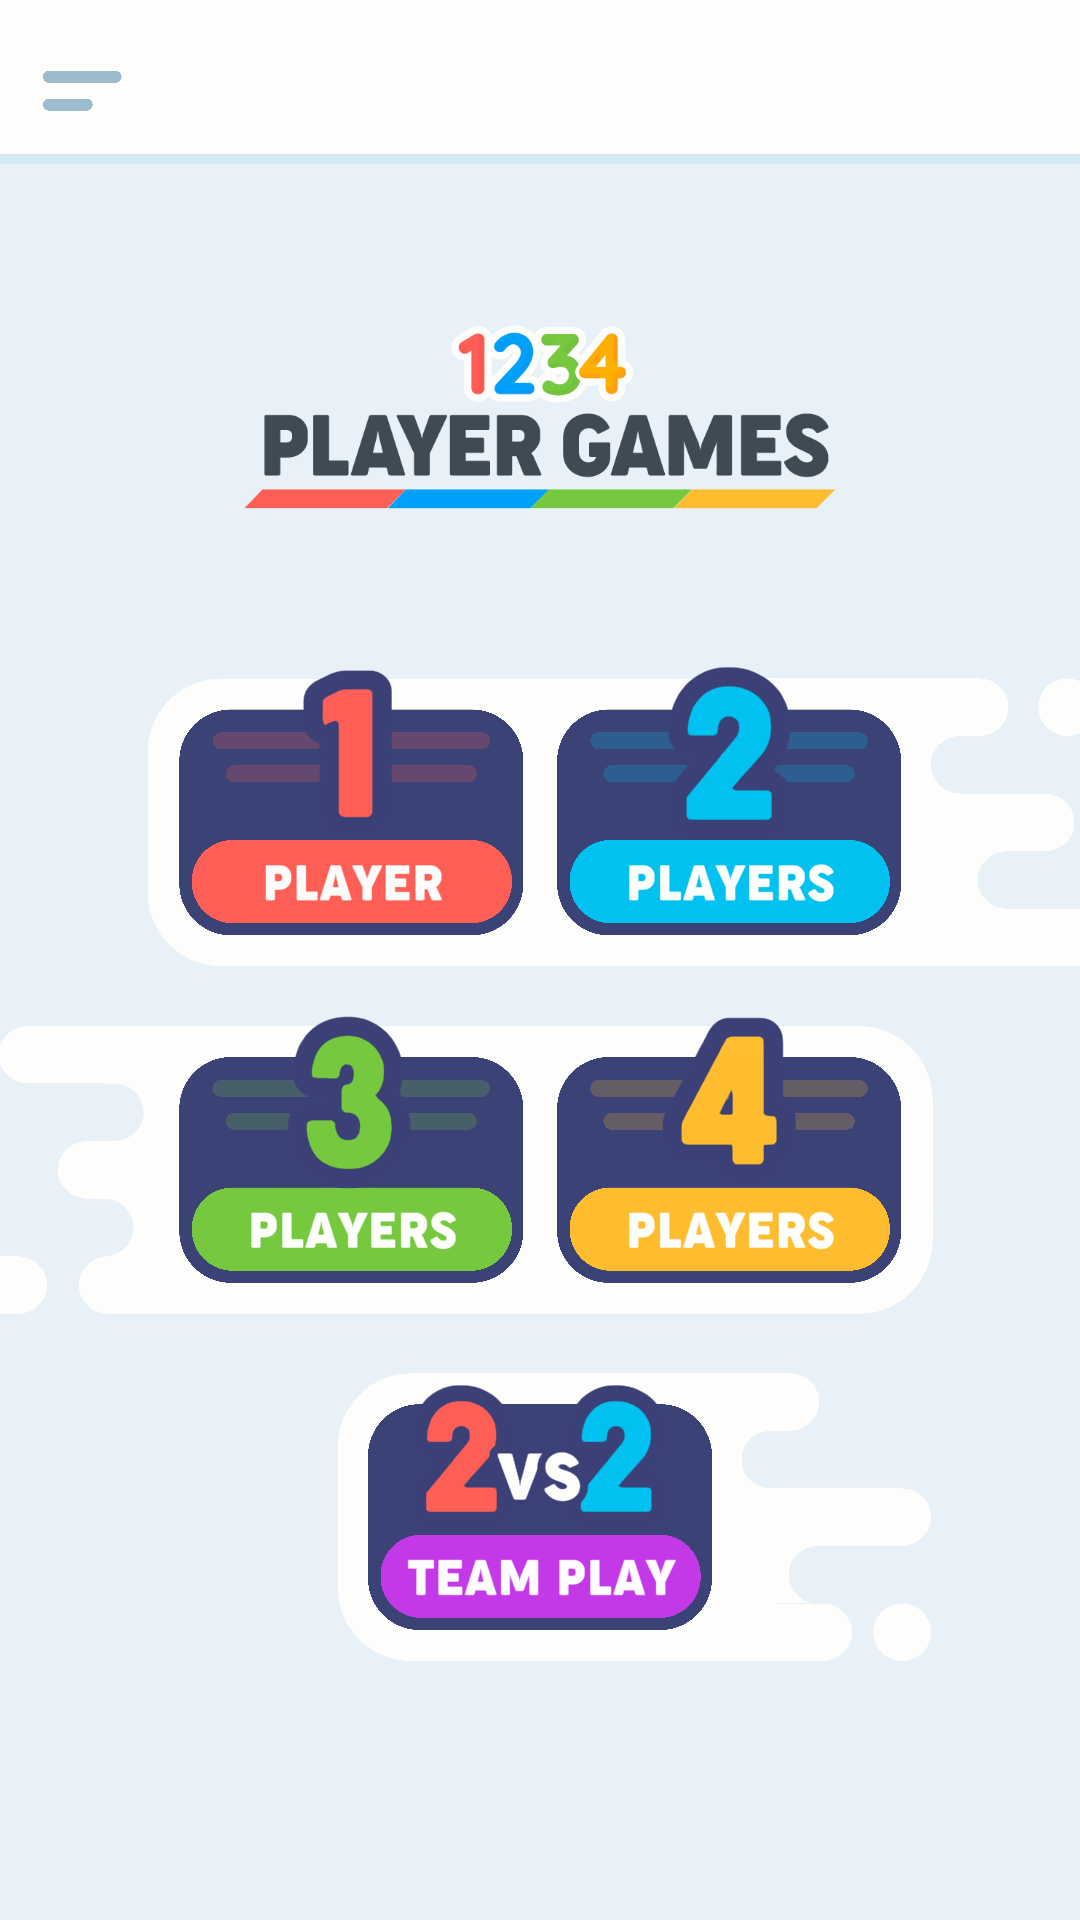 2 3 4 Player Games – Games for 2 3 and 4 players